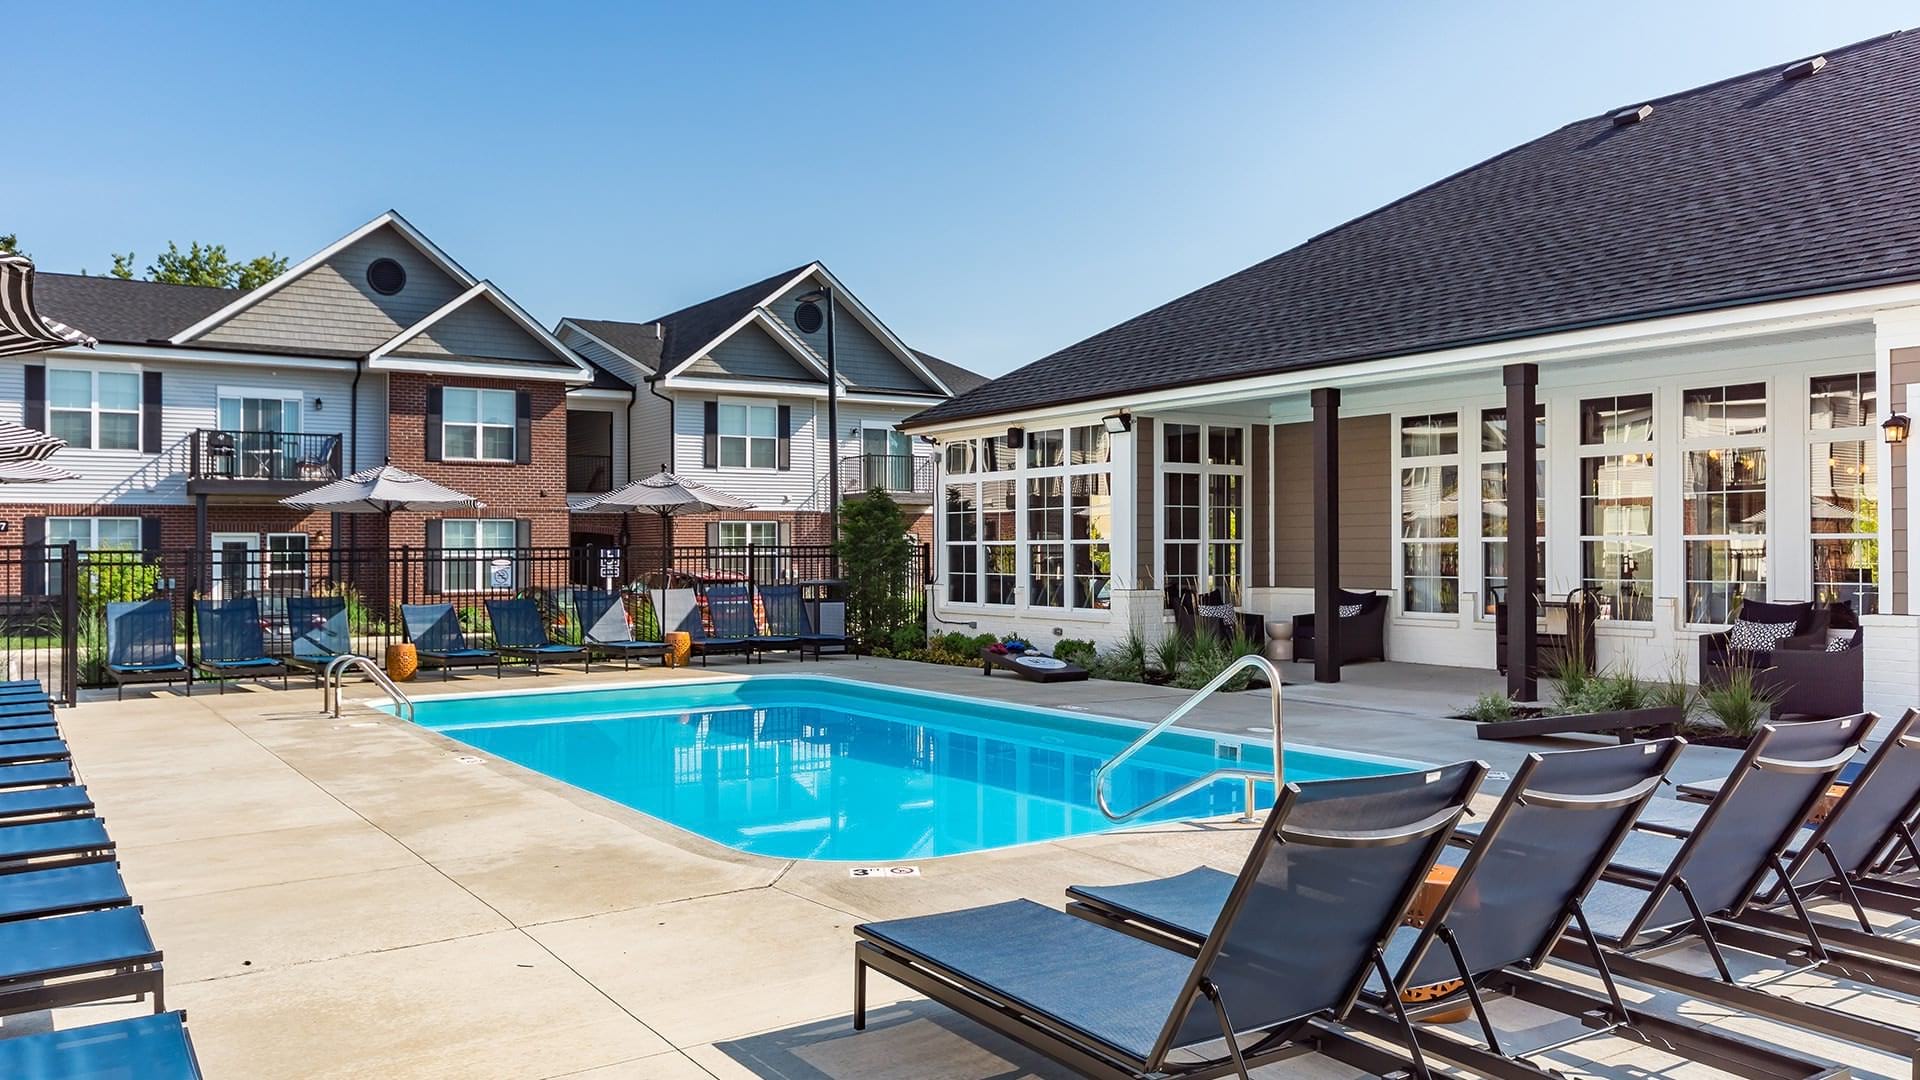 Sparkling Swimming Pool and Lounge Chairs at Our Apartments for Rent in Hilliard, Ohio